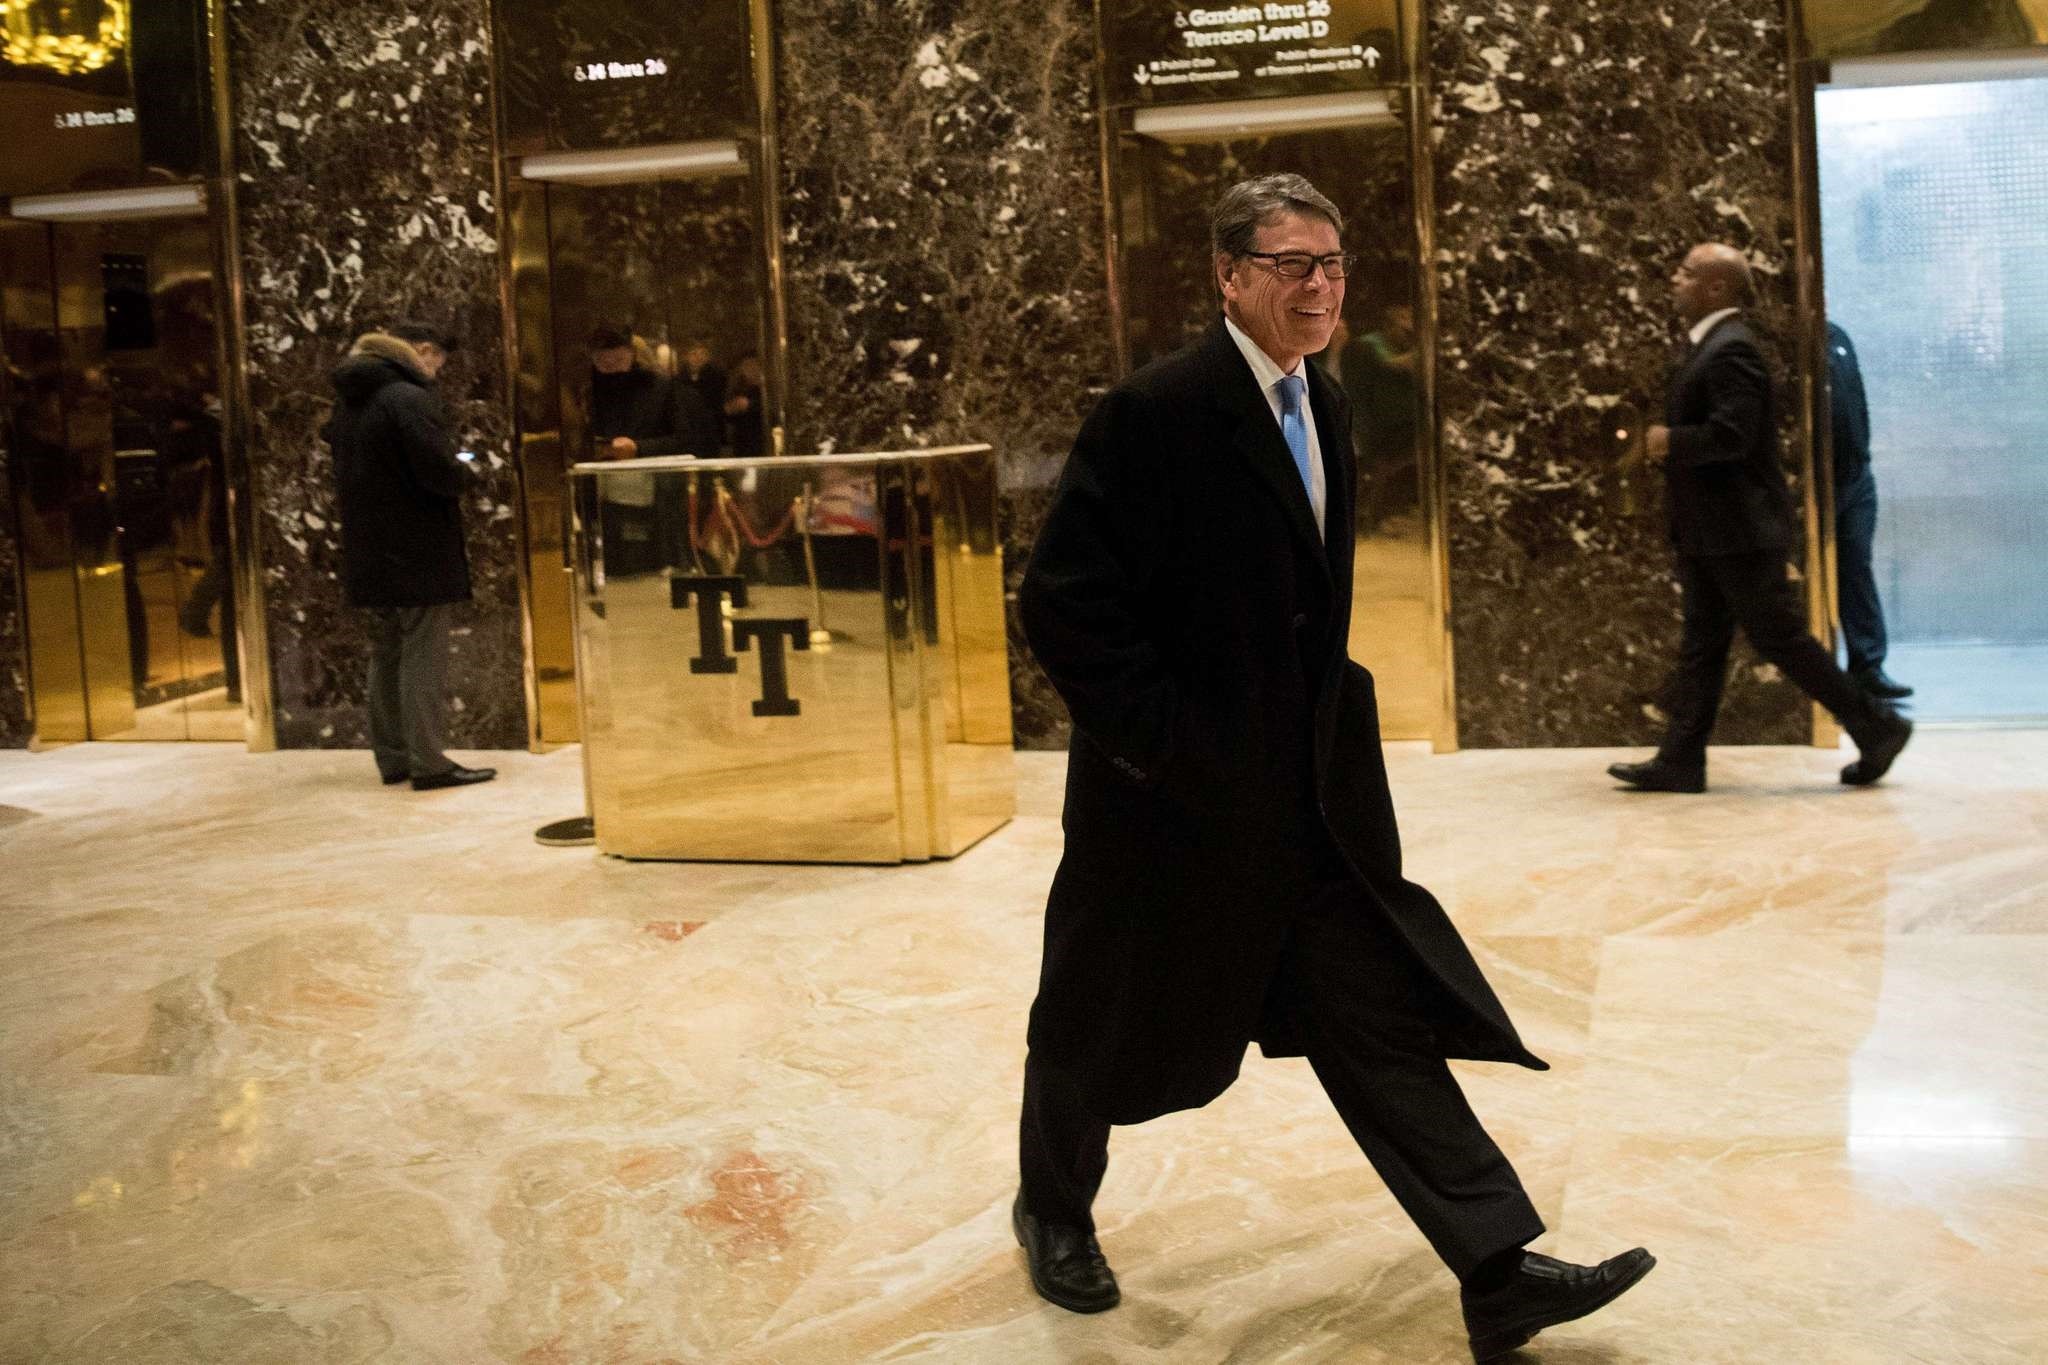  Former Texas Governor Rick Perry walks through the lobby on his way out of Trump Tower, December 12, 2016 in New York City. (AFP Photo)